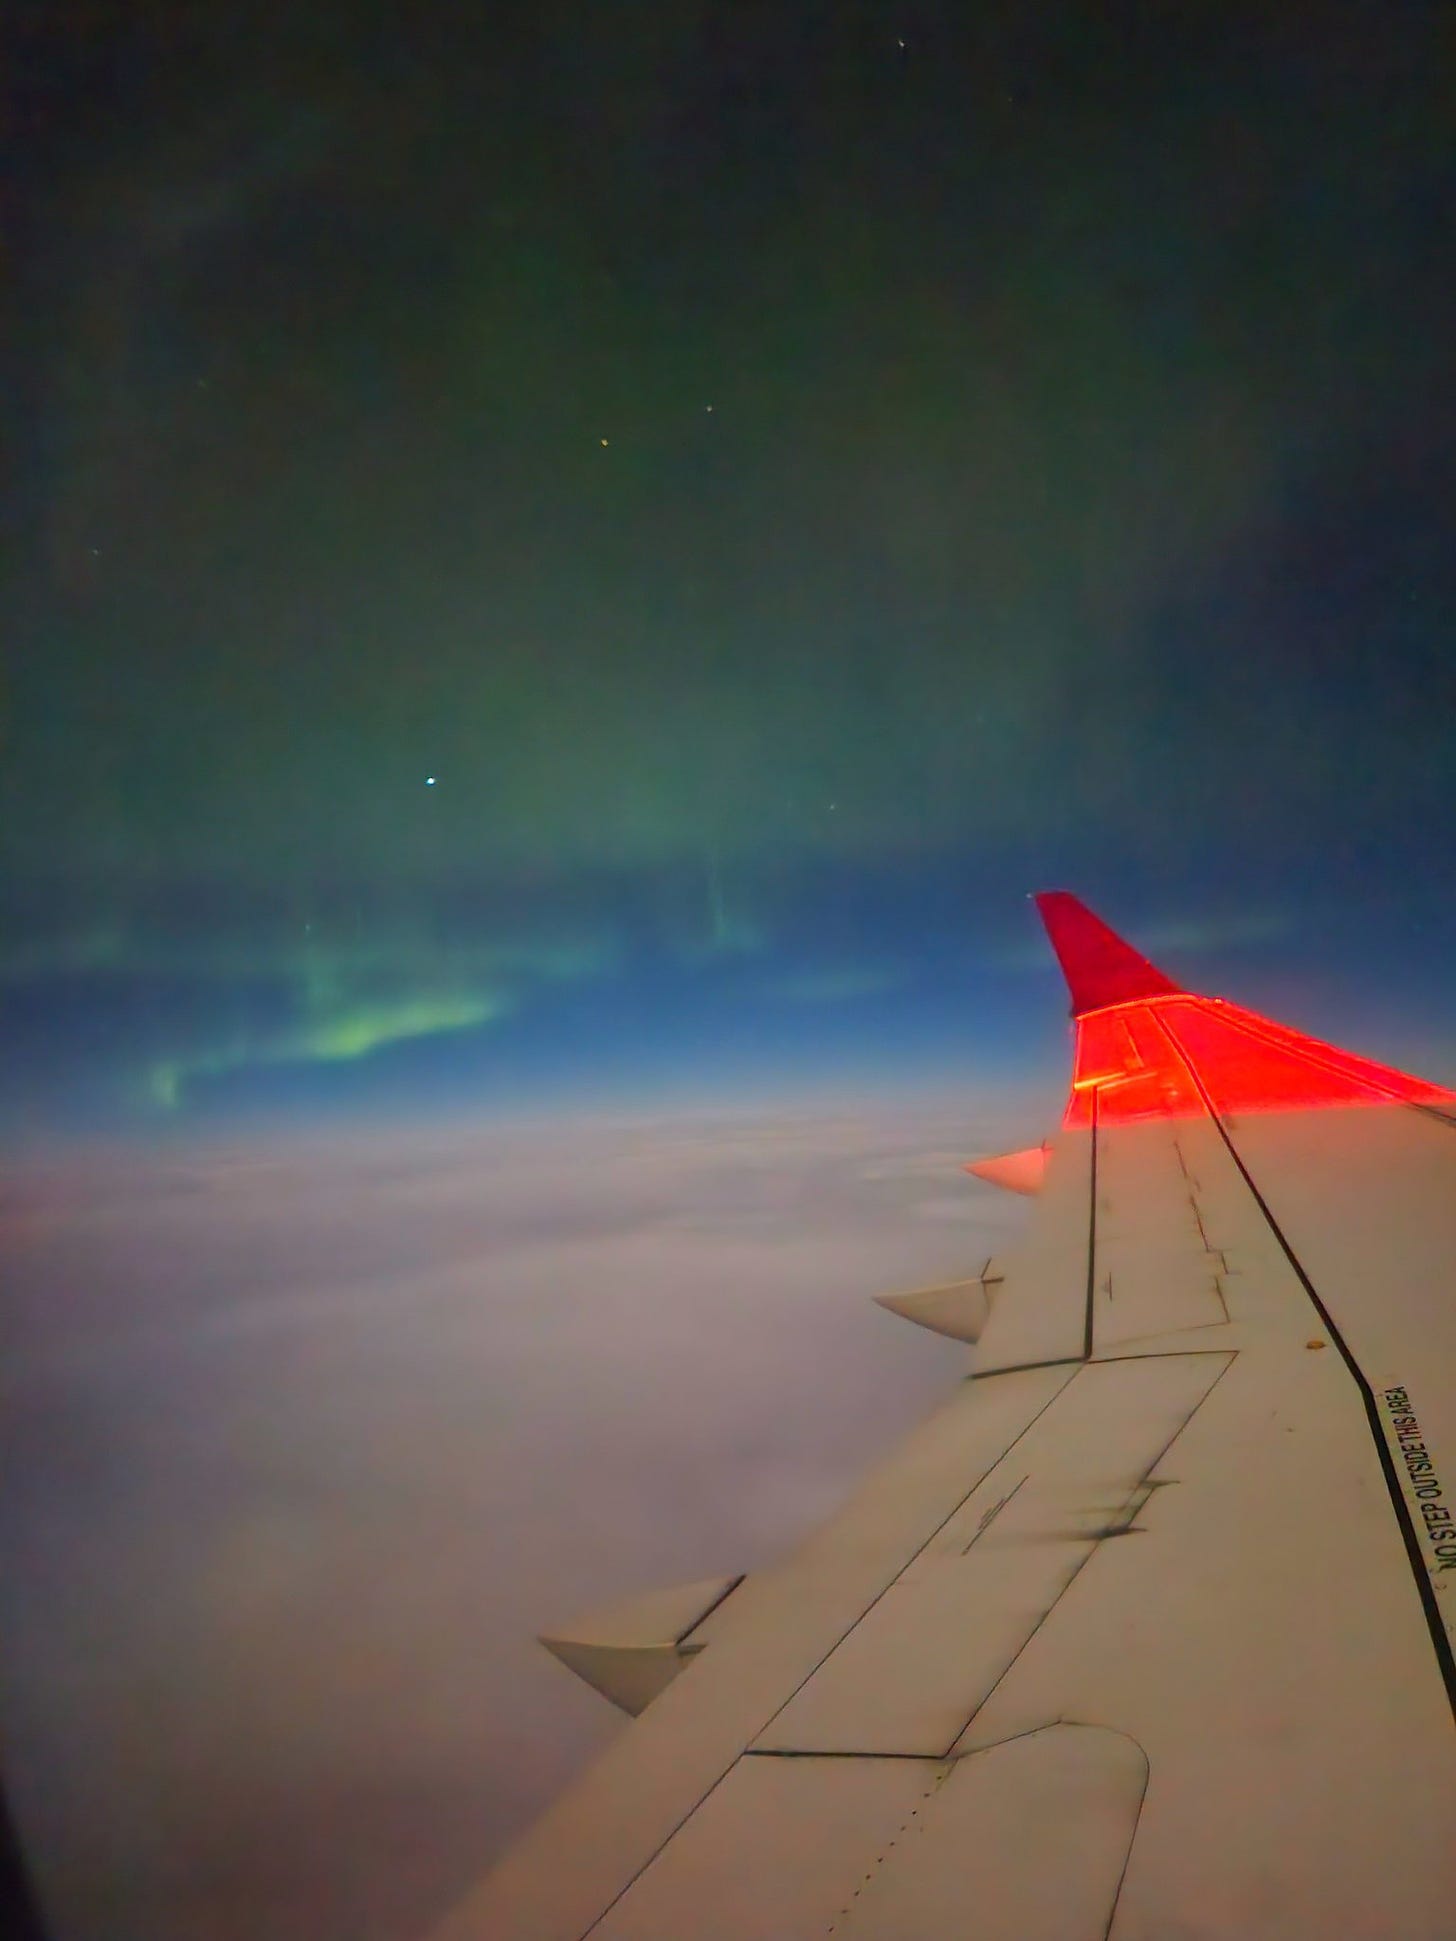 faint green aurora over the wing of an airplane